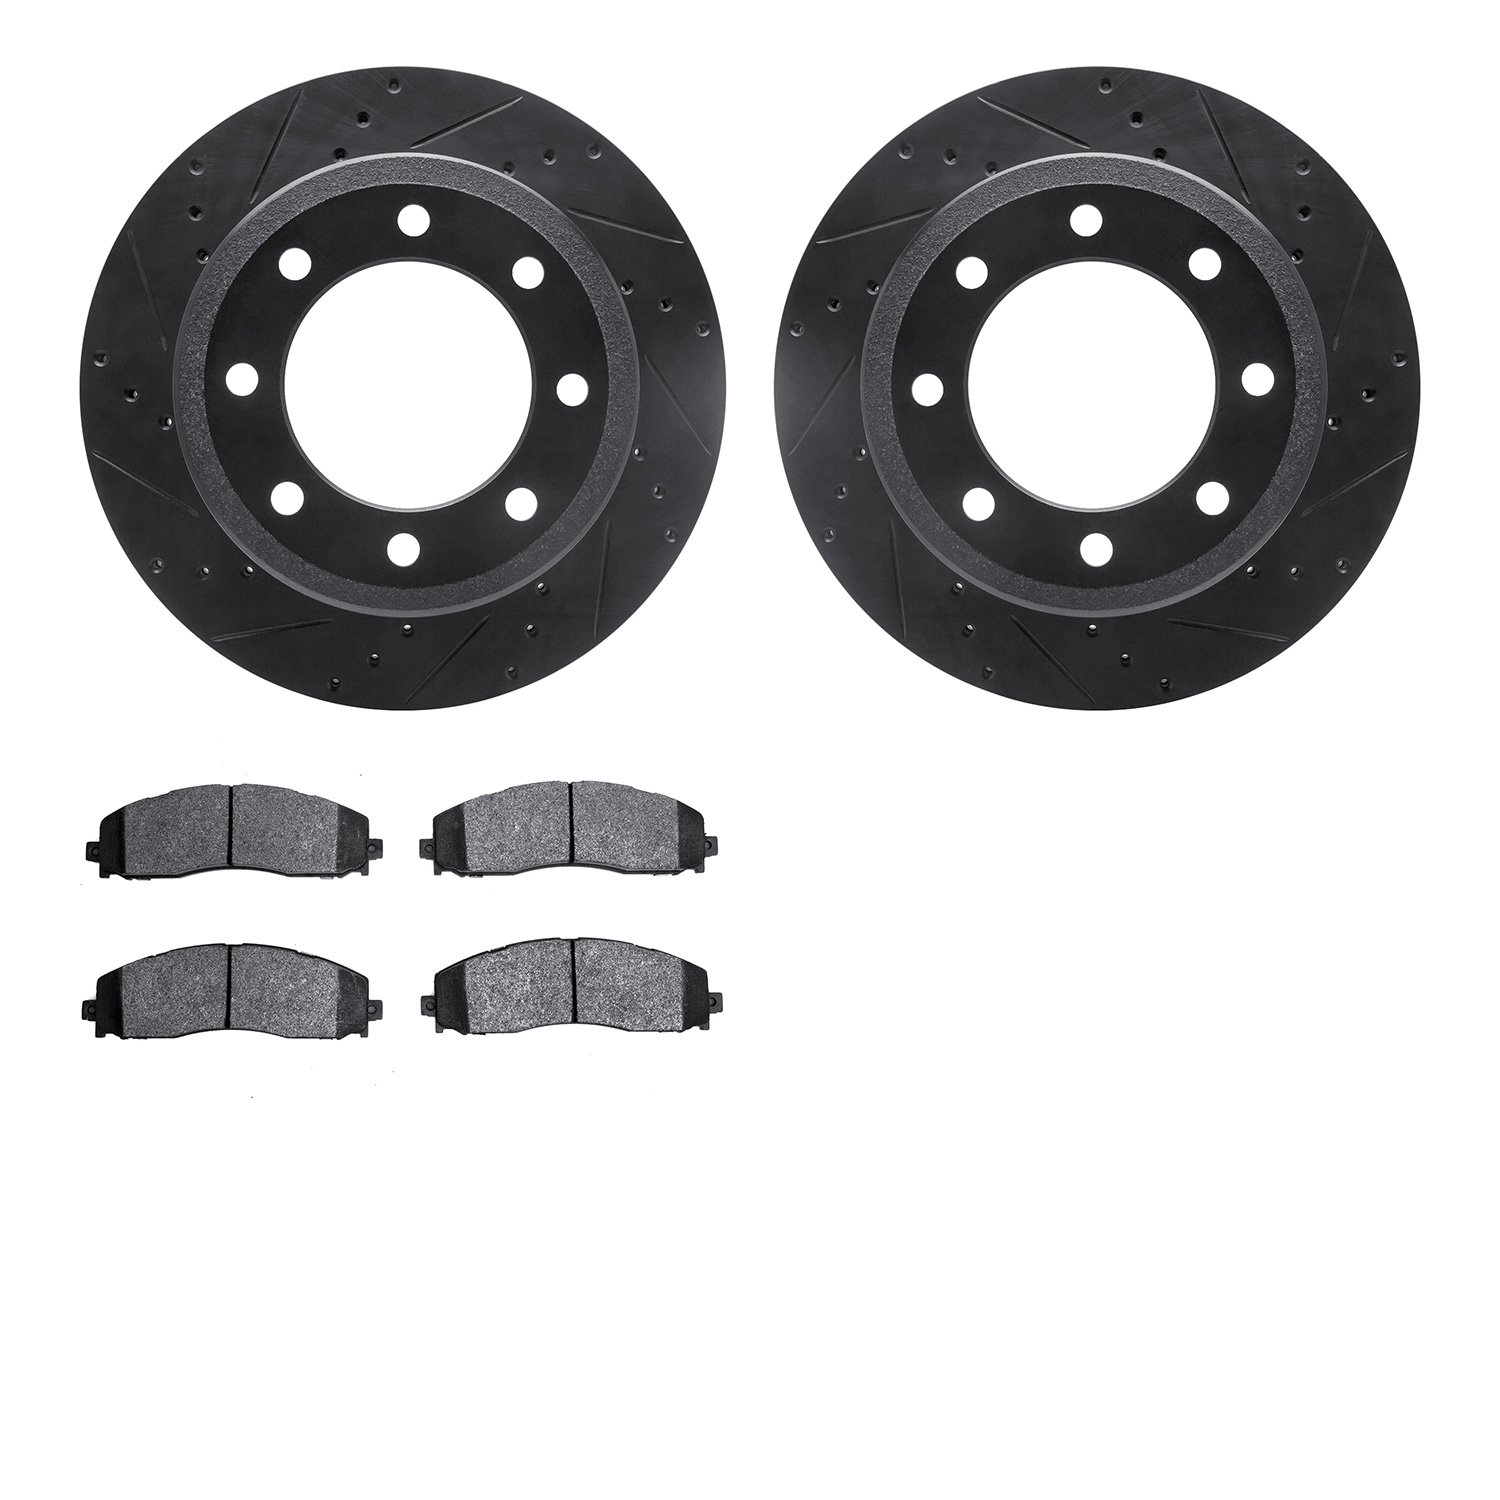 8402-54101 Drilled/Slotted Brake Rotors with Ultimate-Duty Brake Pads Kit [Black], Fits Select Ford/Lincoln/Mercury/Mazda, Posit